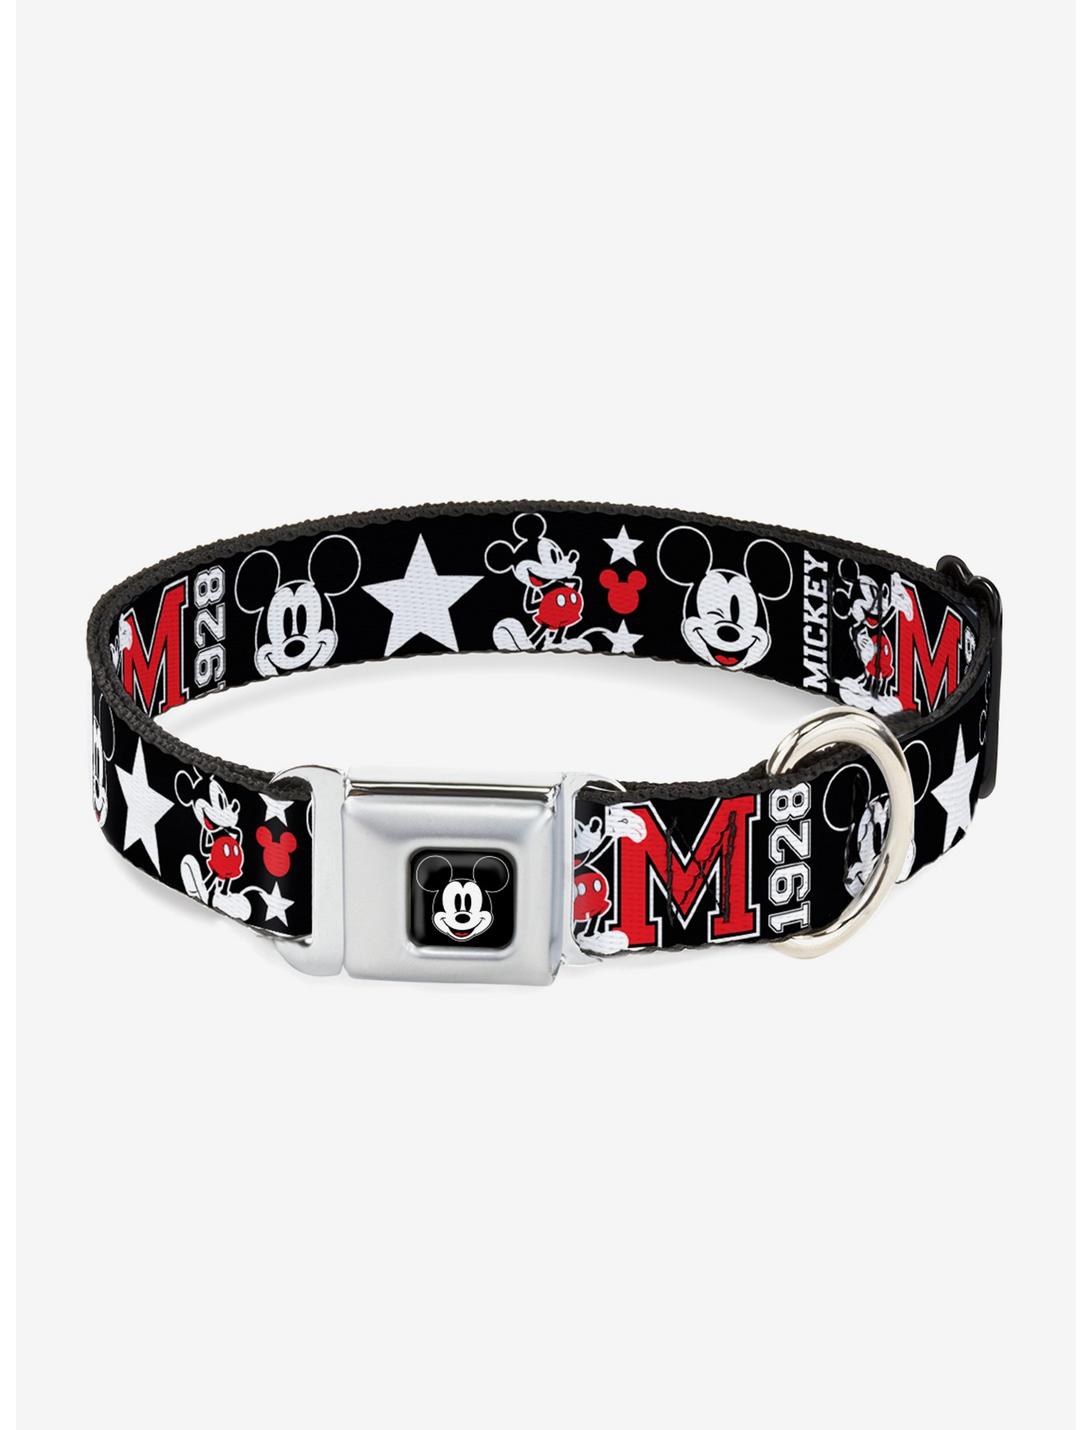 Disney Classic Mickey Mouse 1928 Collage Dog Collar Seatbelt Buckle, BLACK, hi-res